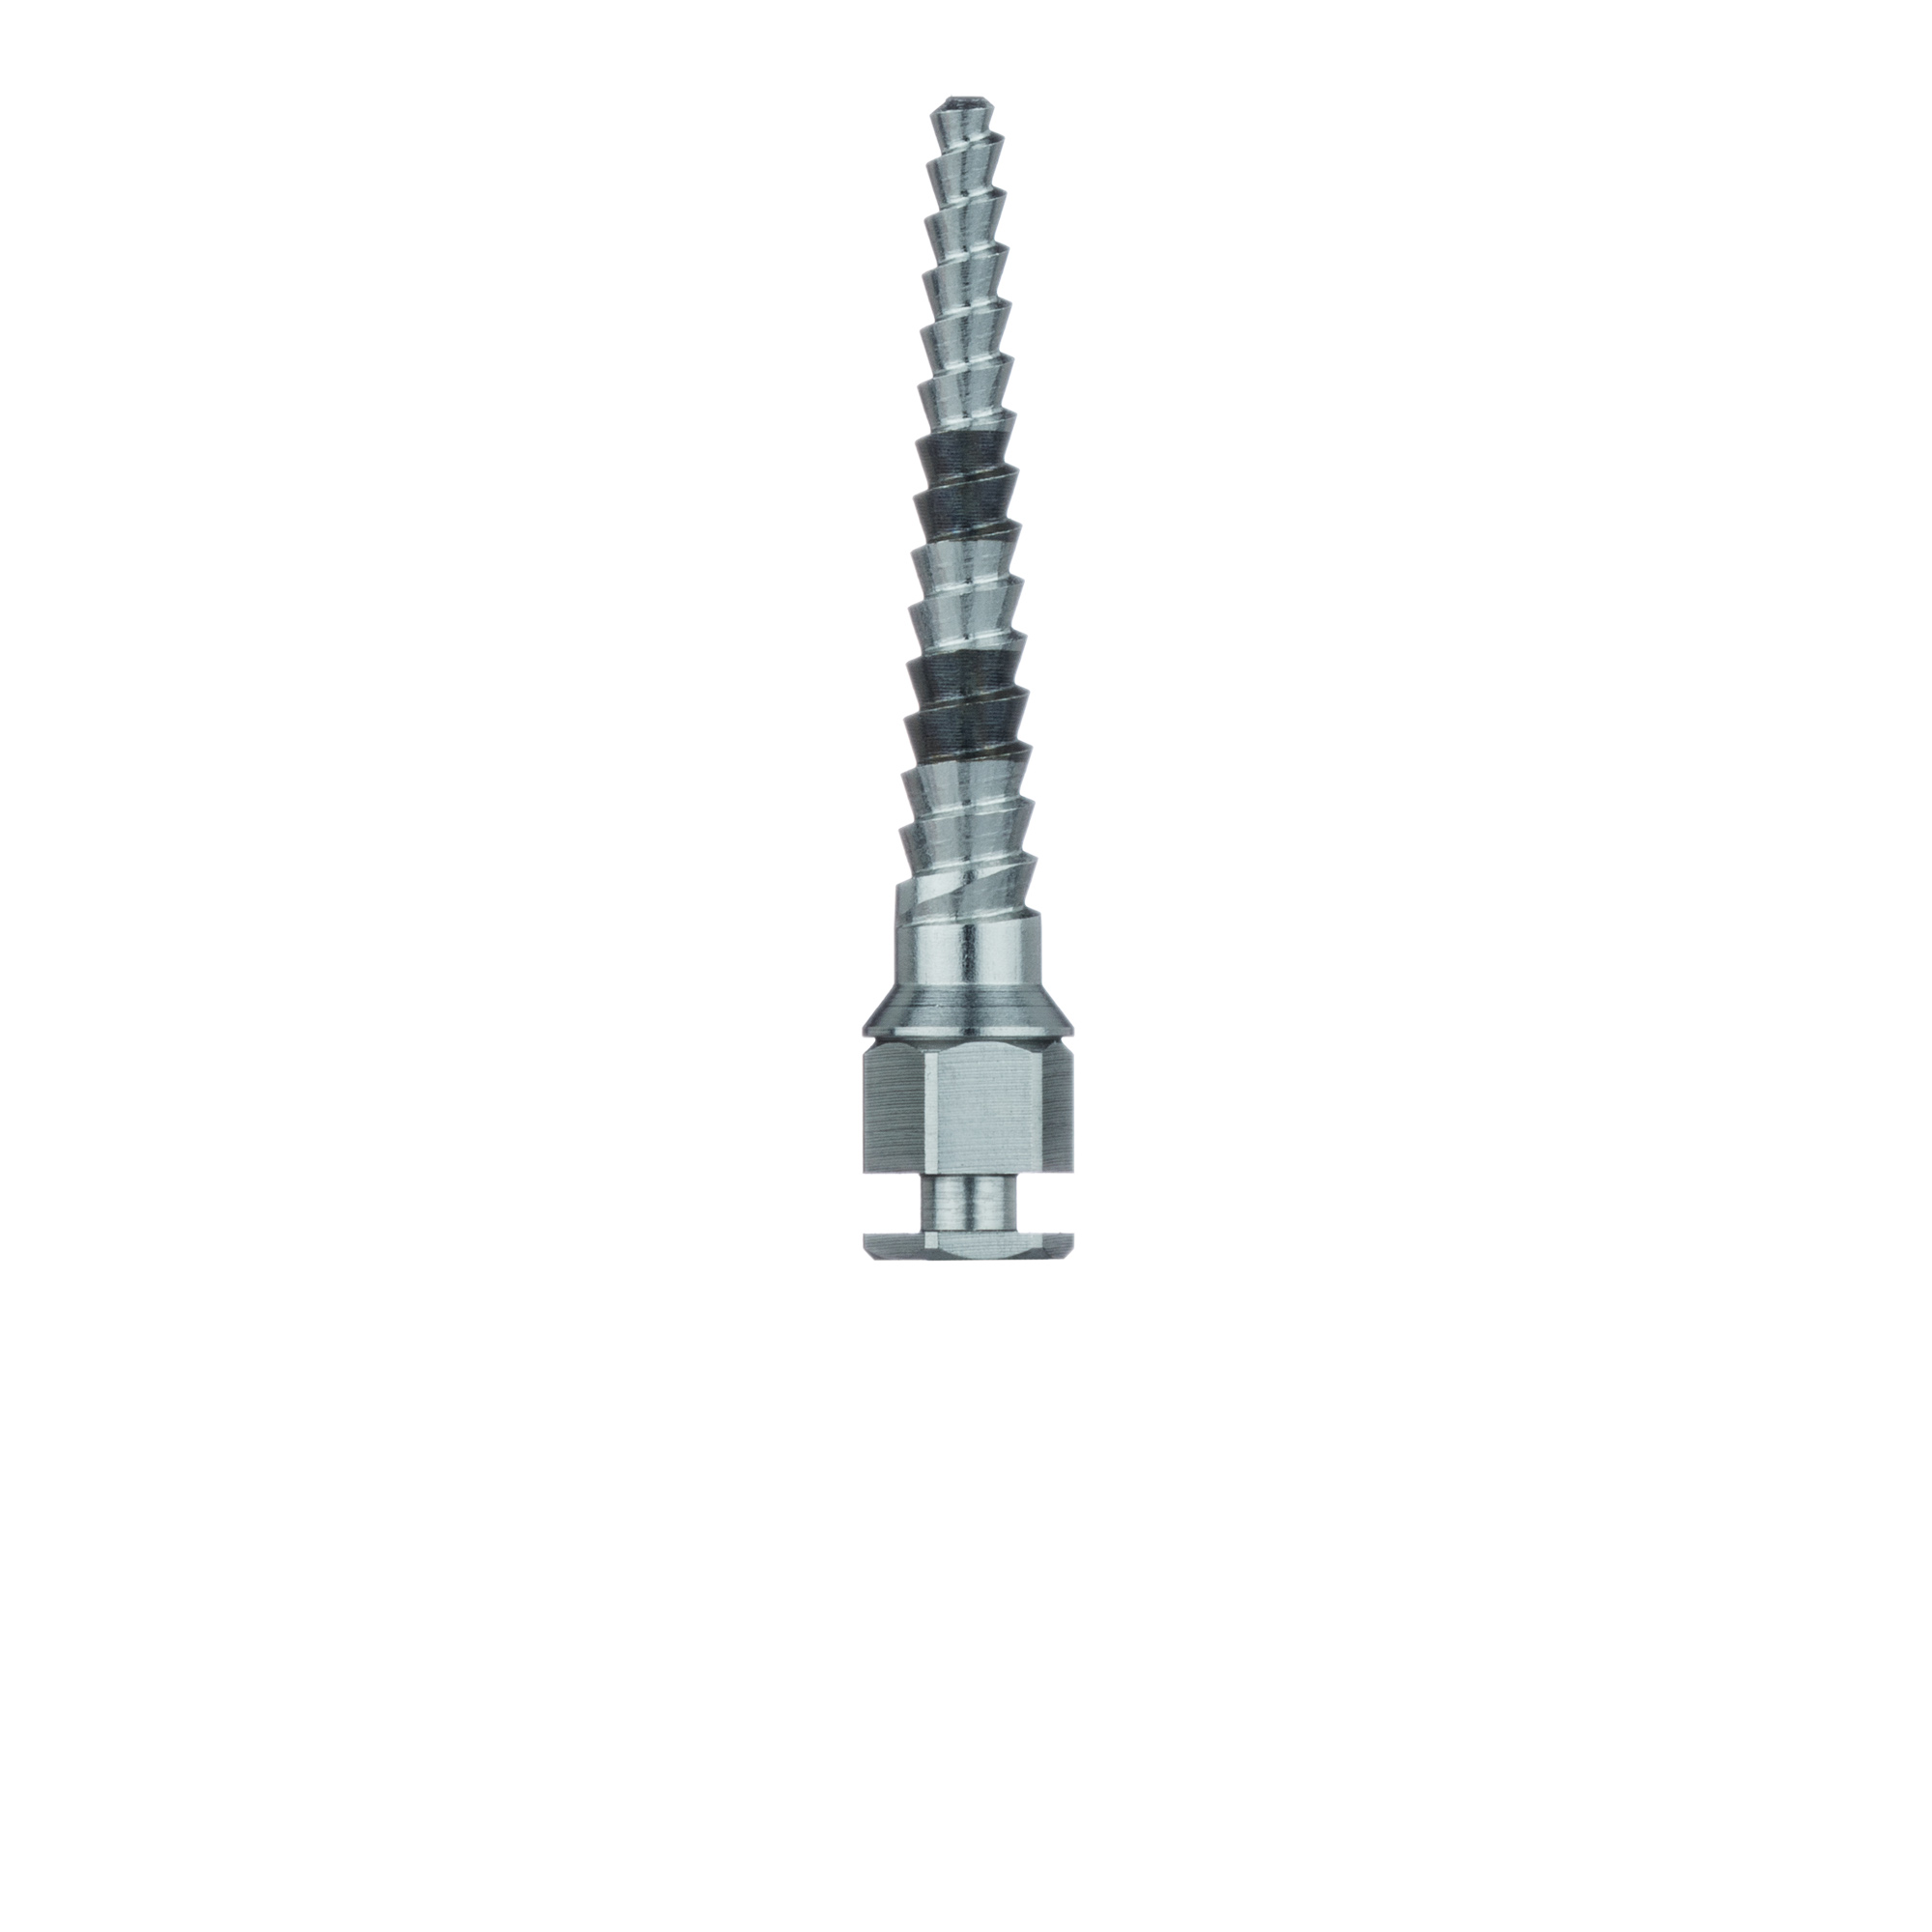 A1005-027 Surgery, Expansion Spreader, 2.7mm X 15mm 